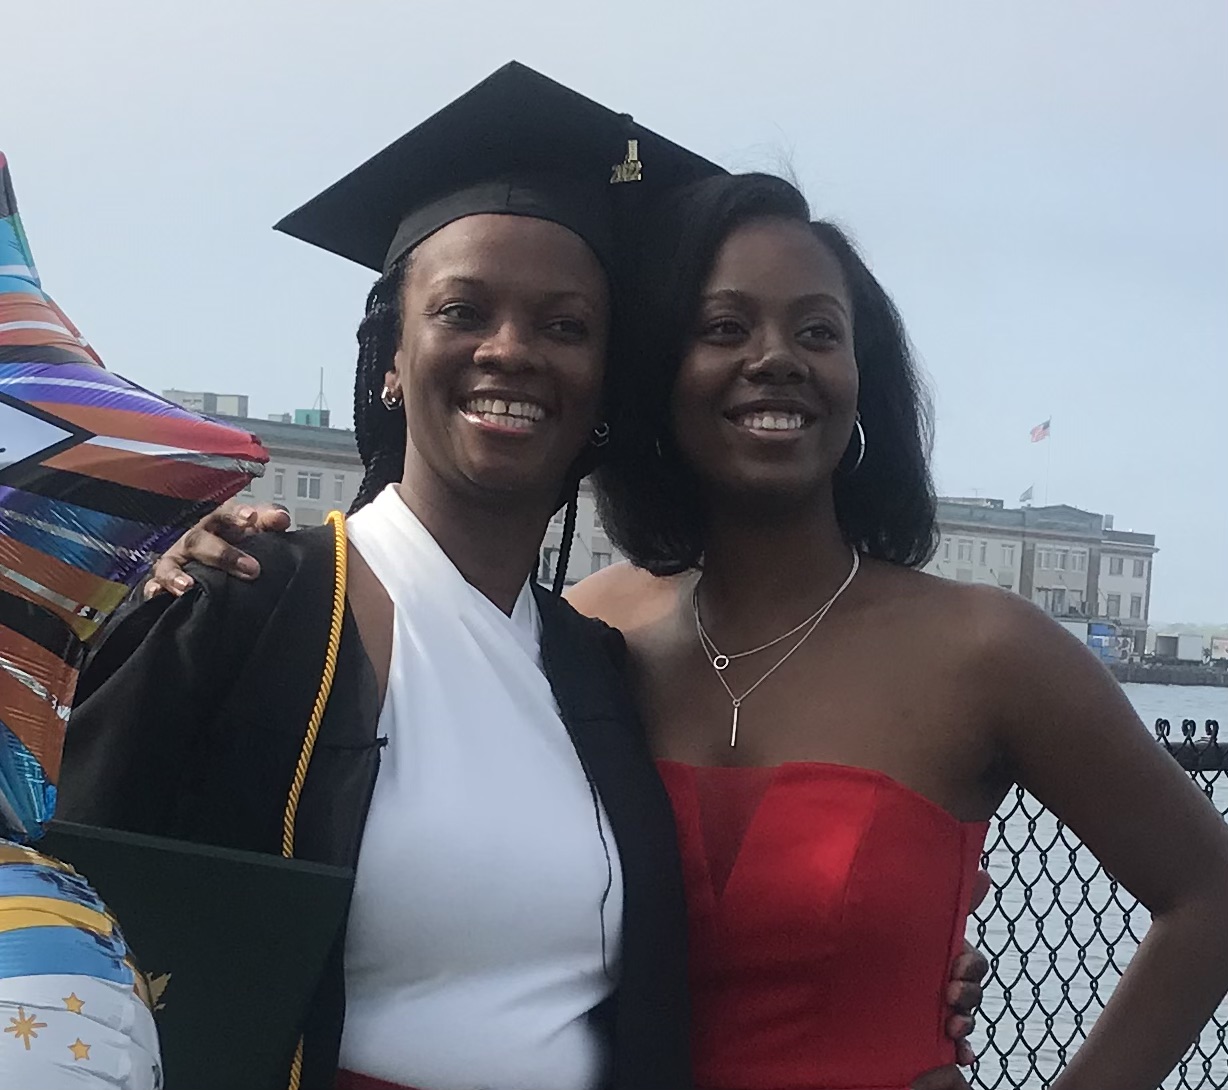 Julette Moore (left) and her daughter Rheanna (right) posing for a picture by the waterfront at the Leader Bank Pavillion at the 2022 Commencement Afternoon Ceremony. Julette is wearing a cap and gown, a white dress, and a yellow cord around her neck. Rheanna is wearing a red top. There are balloons in the background to the left of Julette.